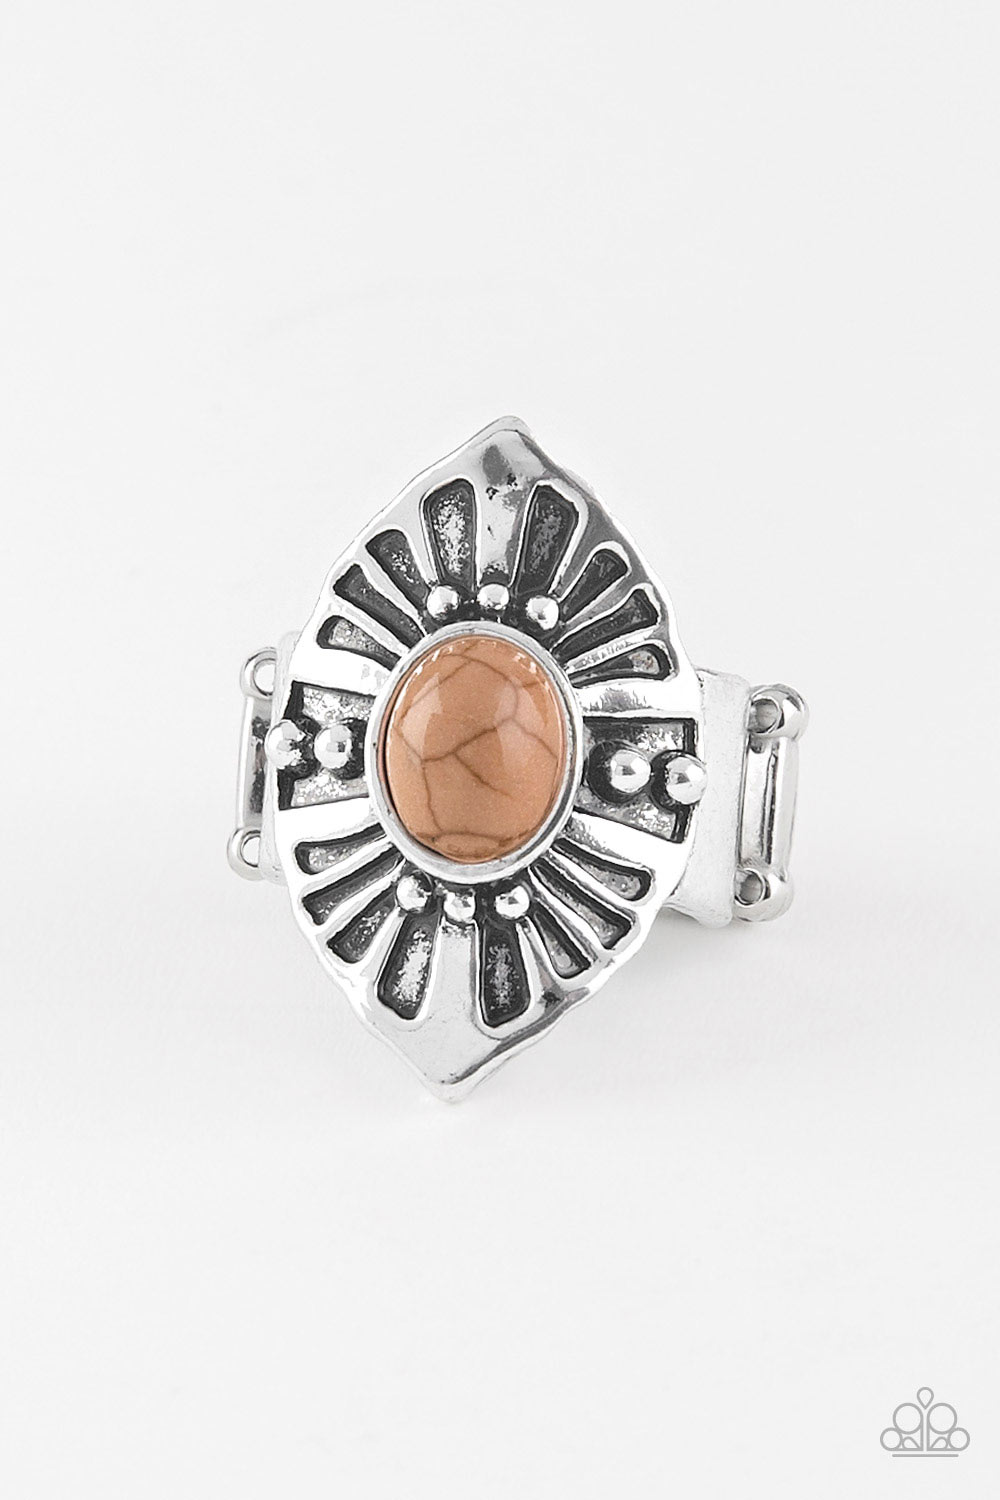 HOMESTEAD For The Weekend Brown Paparazzi Ring Cashmere Pink Jewels